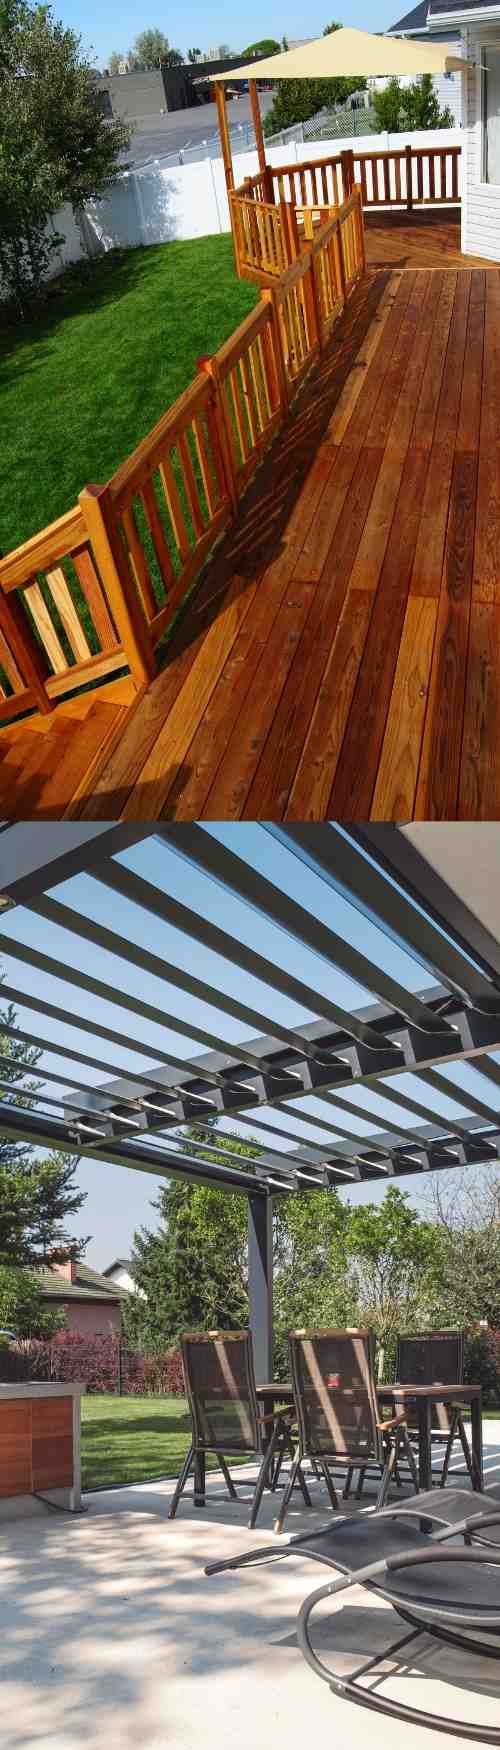 Pergolas and Decks in Melbourne – How Much Do They Cost